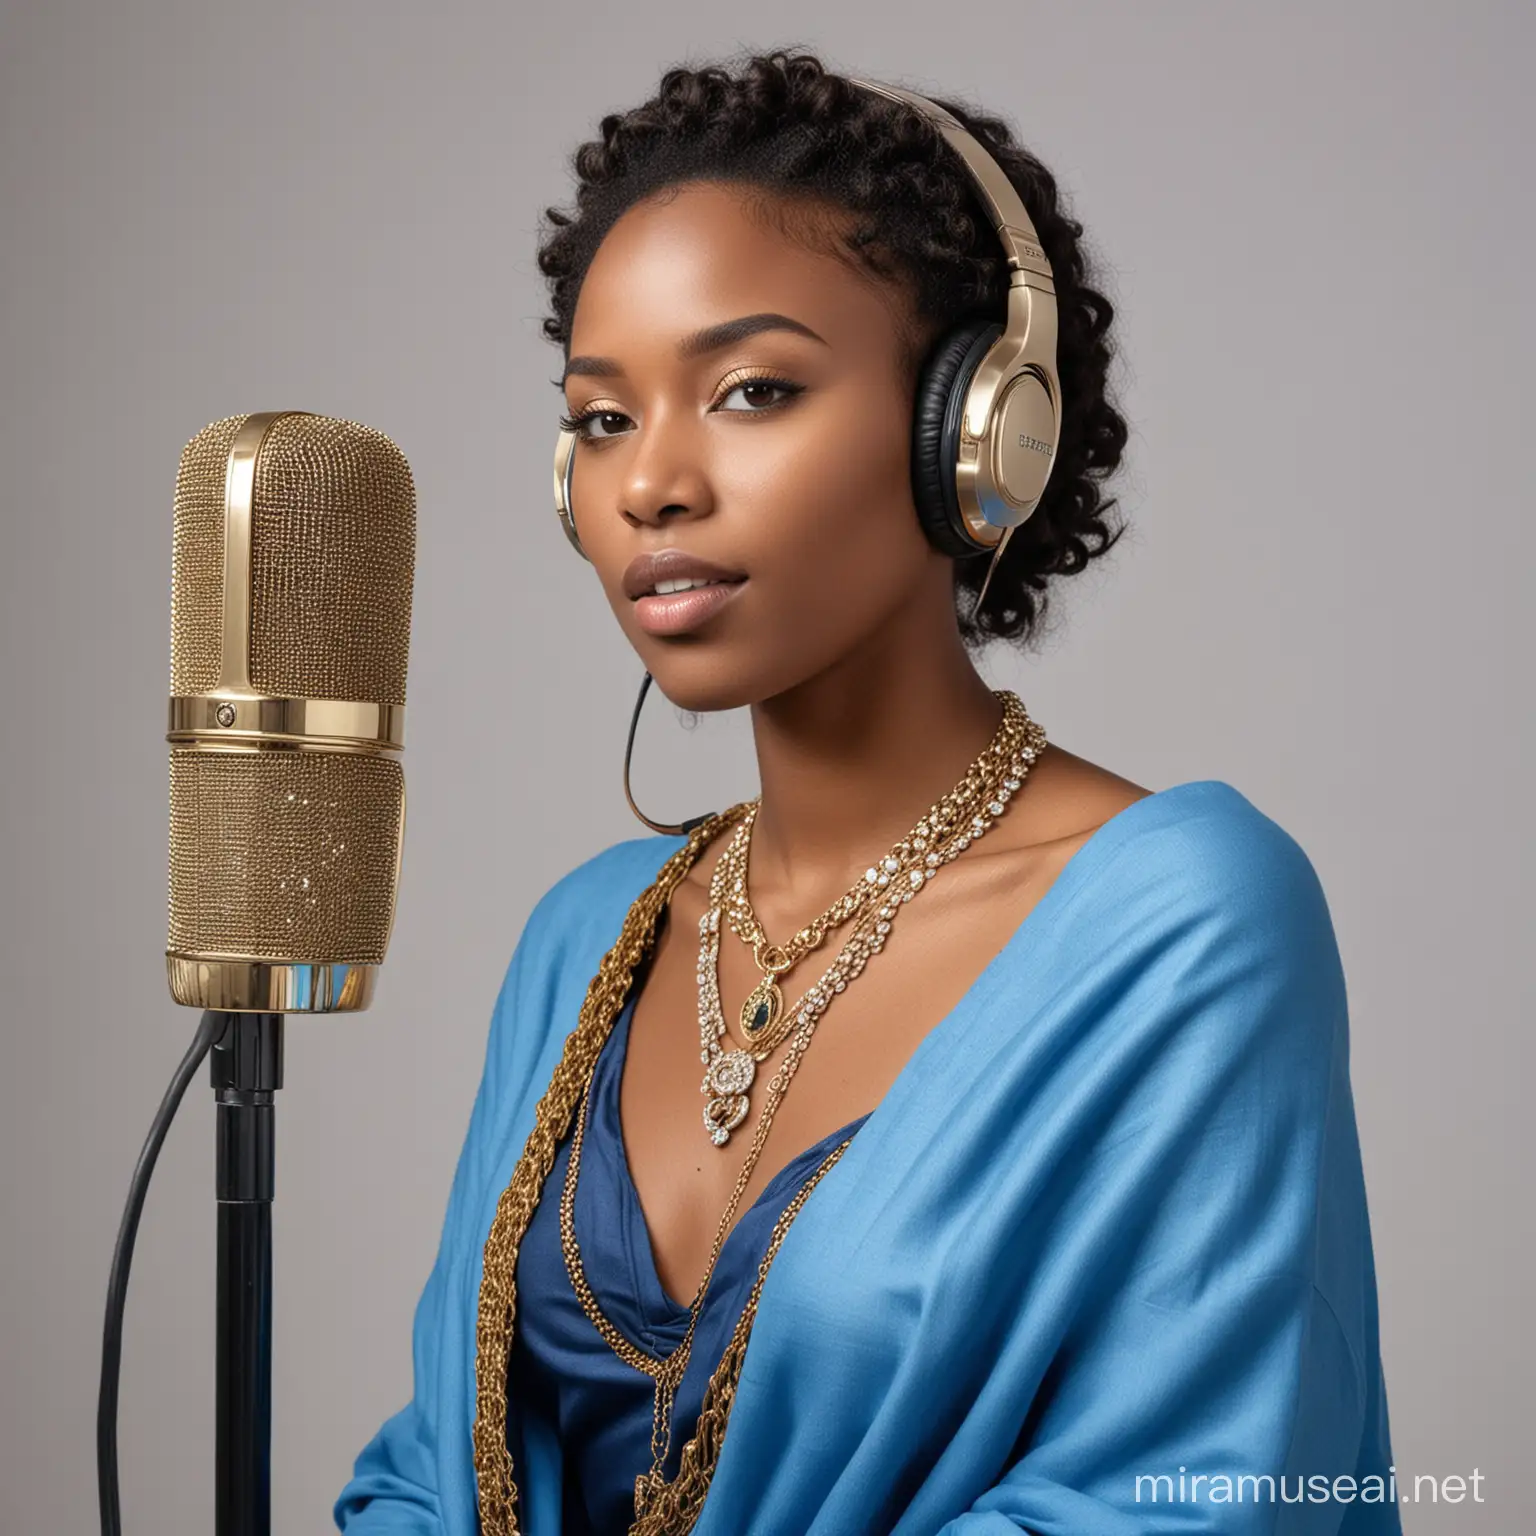 black ebony girl, model on podium wearing diamond jewelry on the neck and blue blue linen cloths decorated in gold, speaking in the studio with microphone, on headphones in Africa Web Radio studio